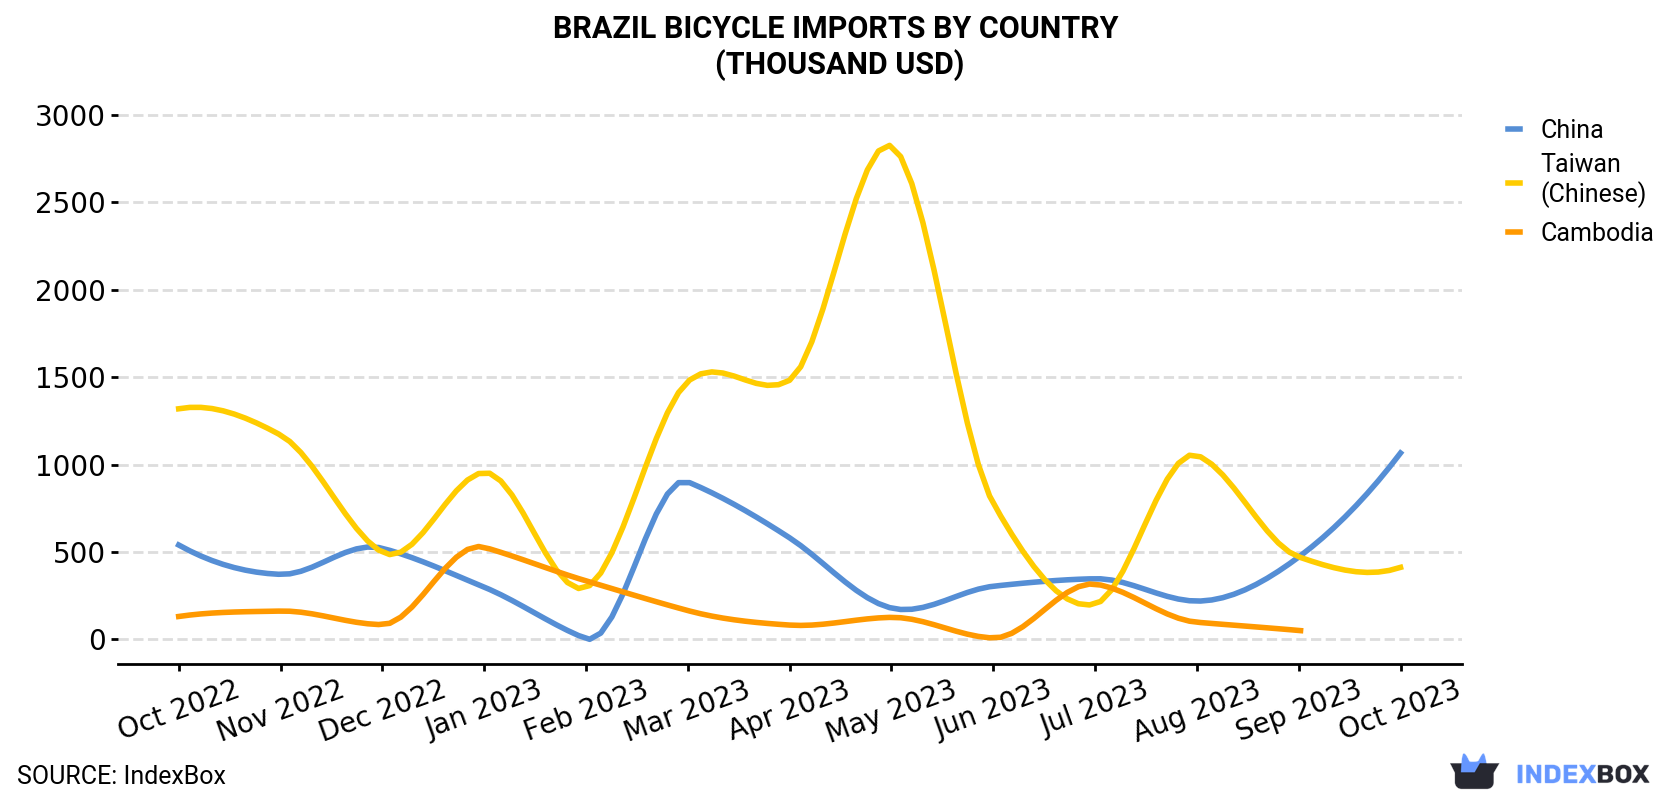 Brazil Bicycle Imports By Country (Thousand USD)